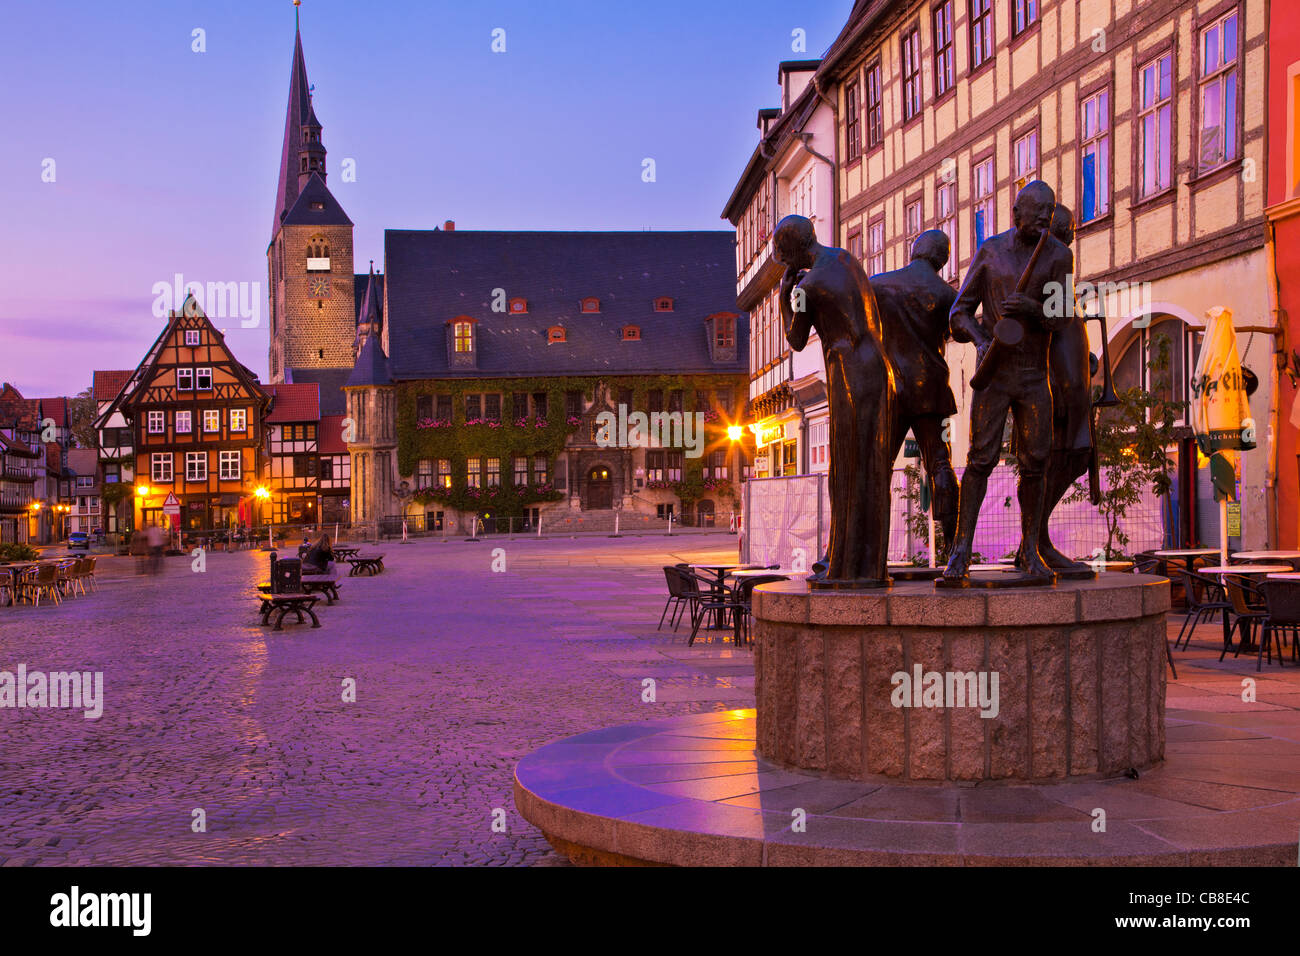 Twilight in the main market place or square, the Markt, Quedlinburg, Germany with statue of Muenzenberg Musicians in foreground. Stock Photo